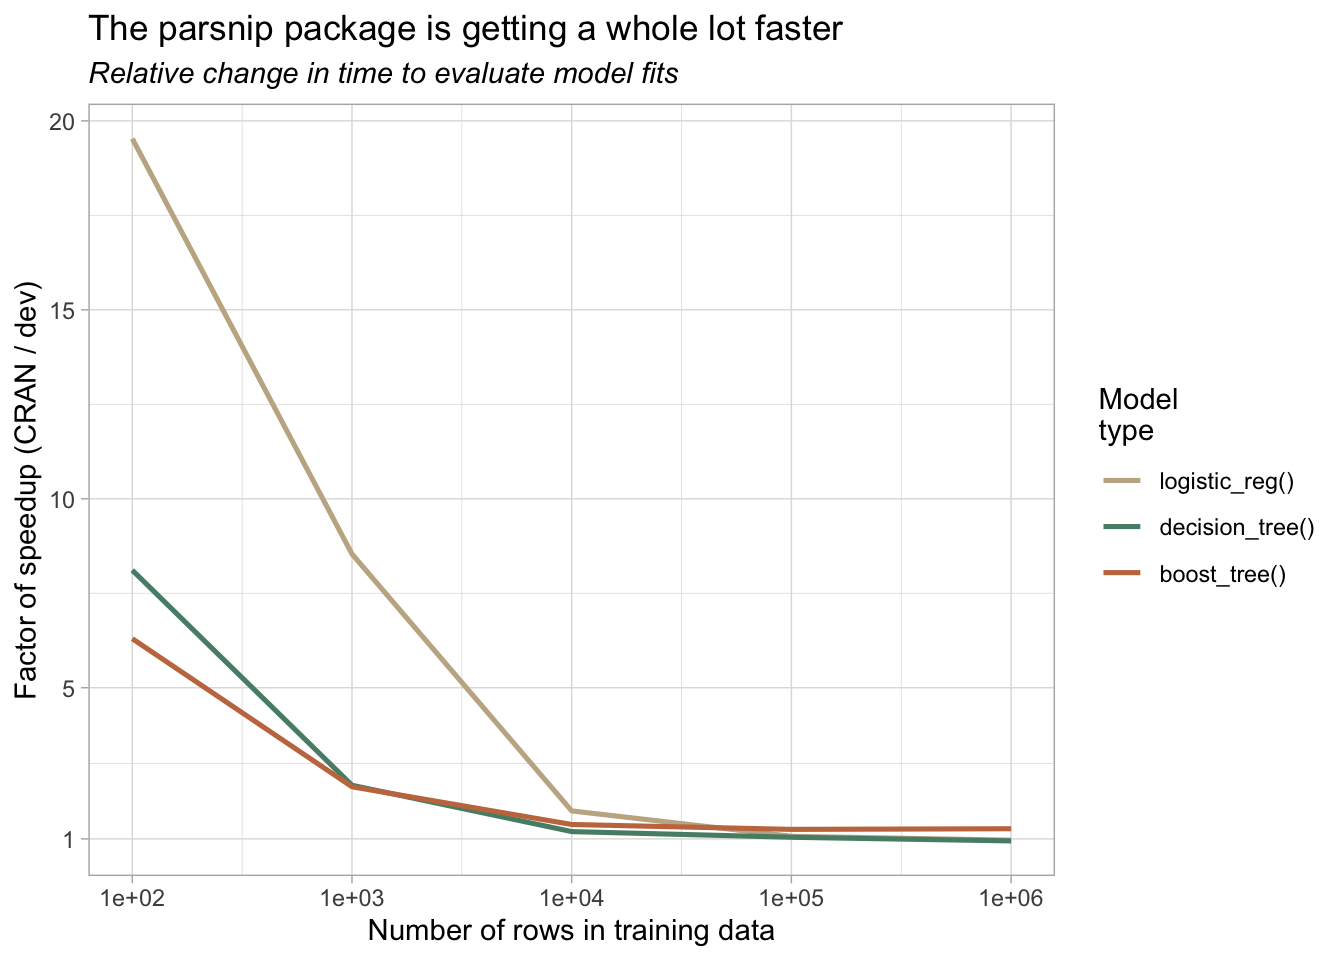 A ggplot2 line graph plotting relative change in time to evaluate model fits with the parsnip package. Fits on datasets with 100 training rows are 6 to 20 times faster, while fits on datasets with 100,000 or more rows take about the same amount of time as they used to.